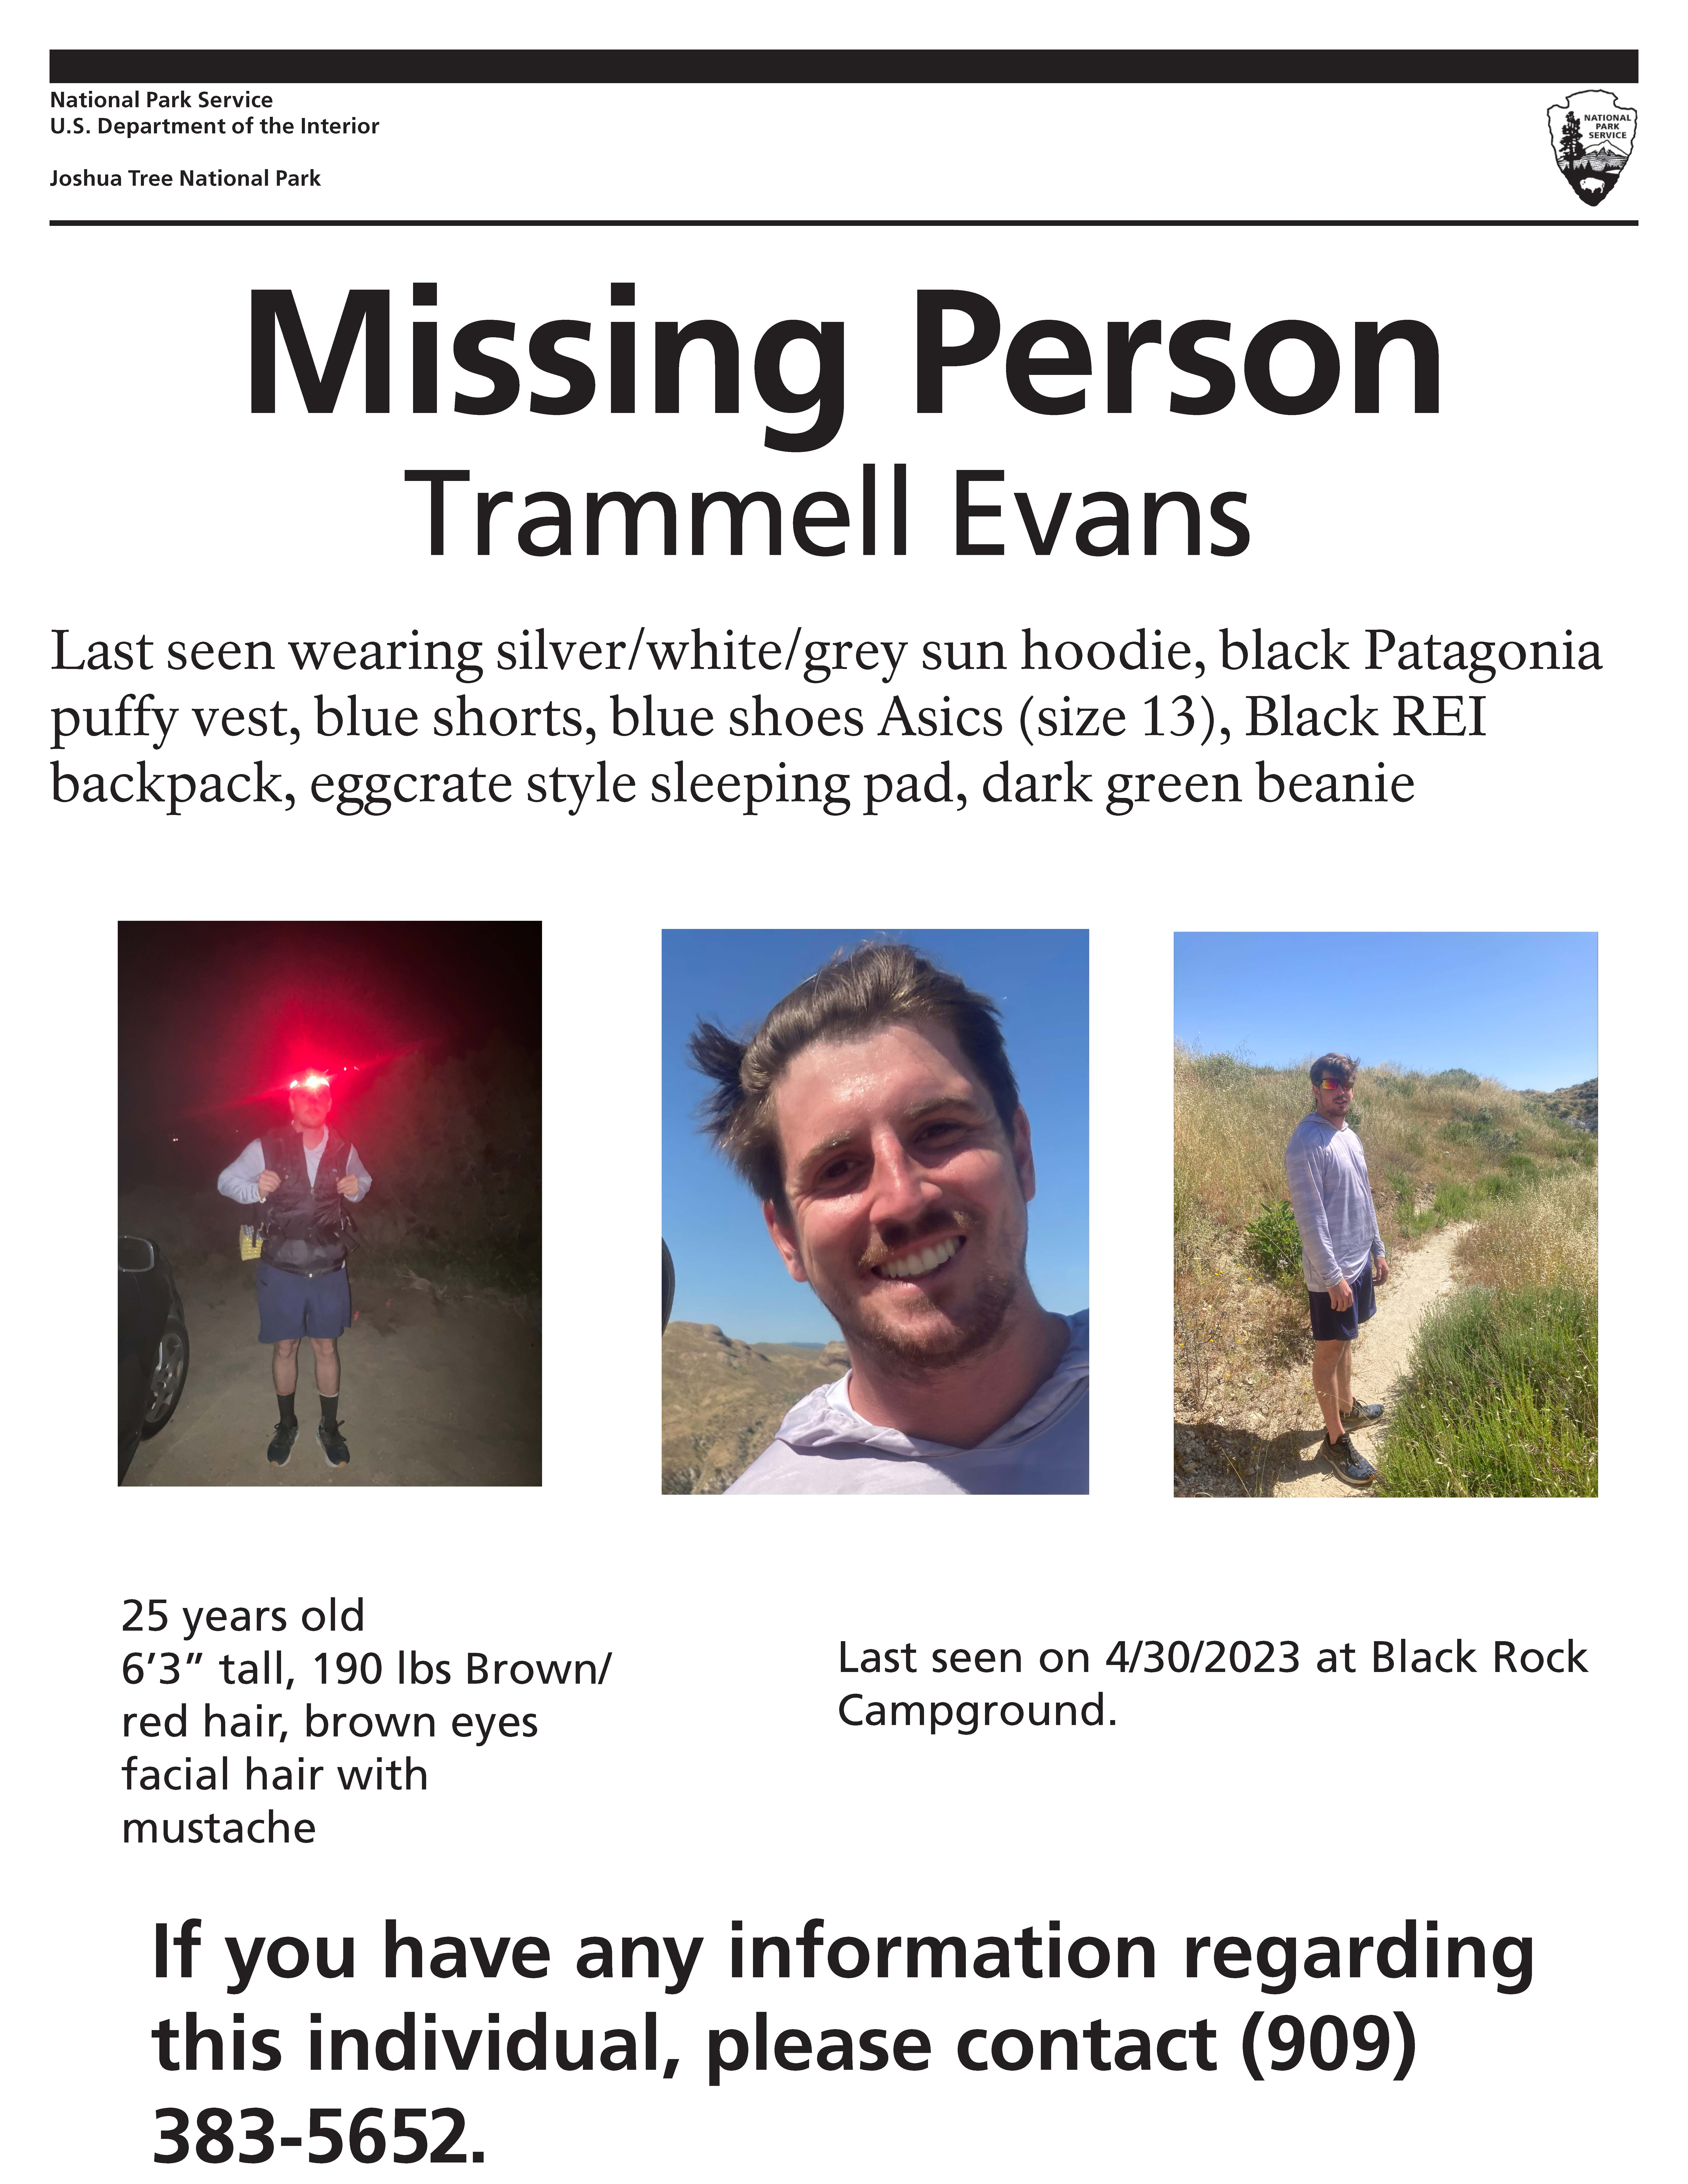 Missing person's flyer with three photos of a man, 6'3", brown hair, brown eyes, one photo he's on a trail.